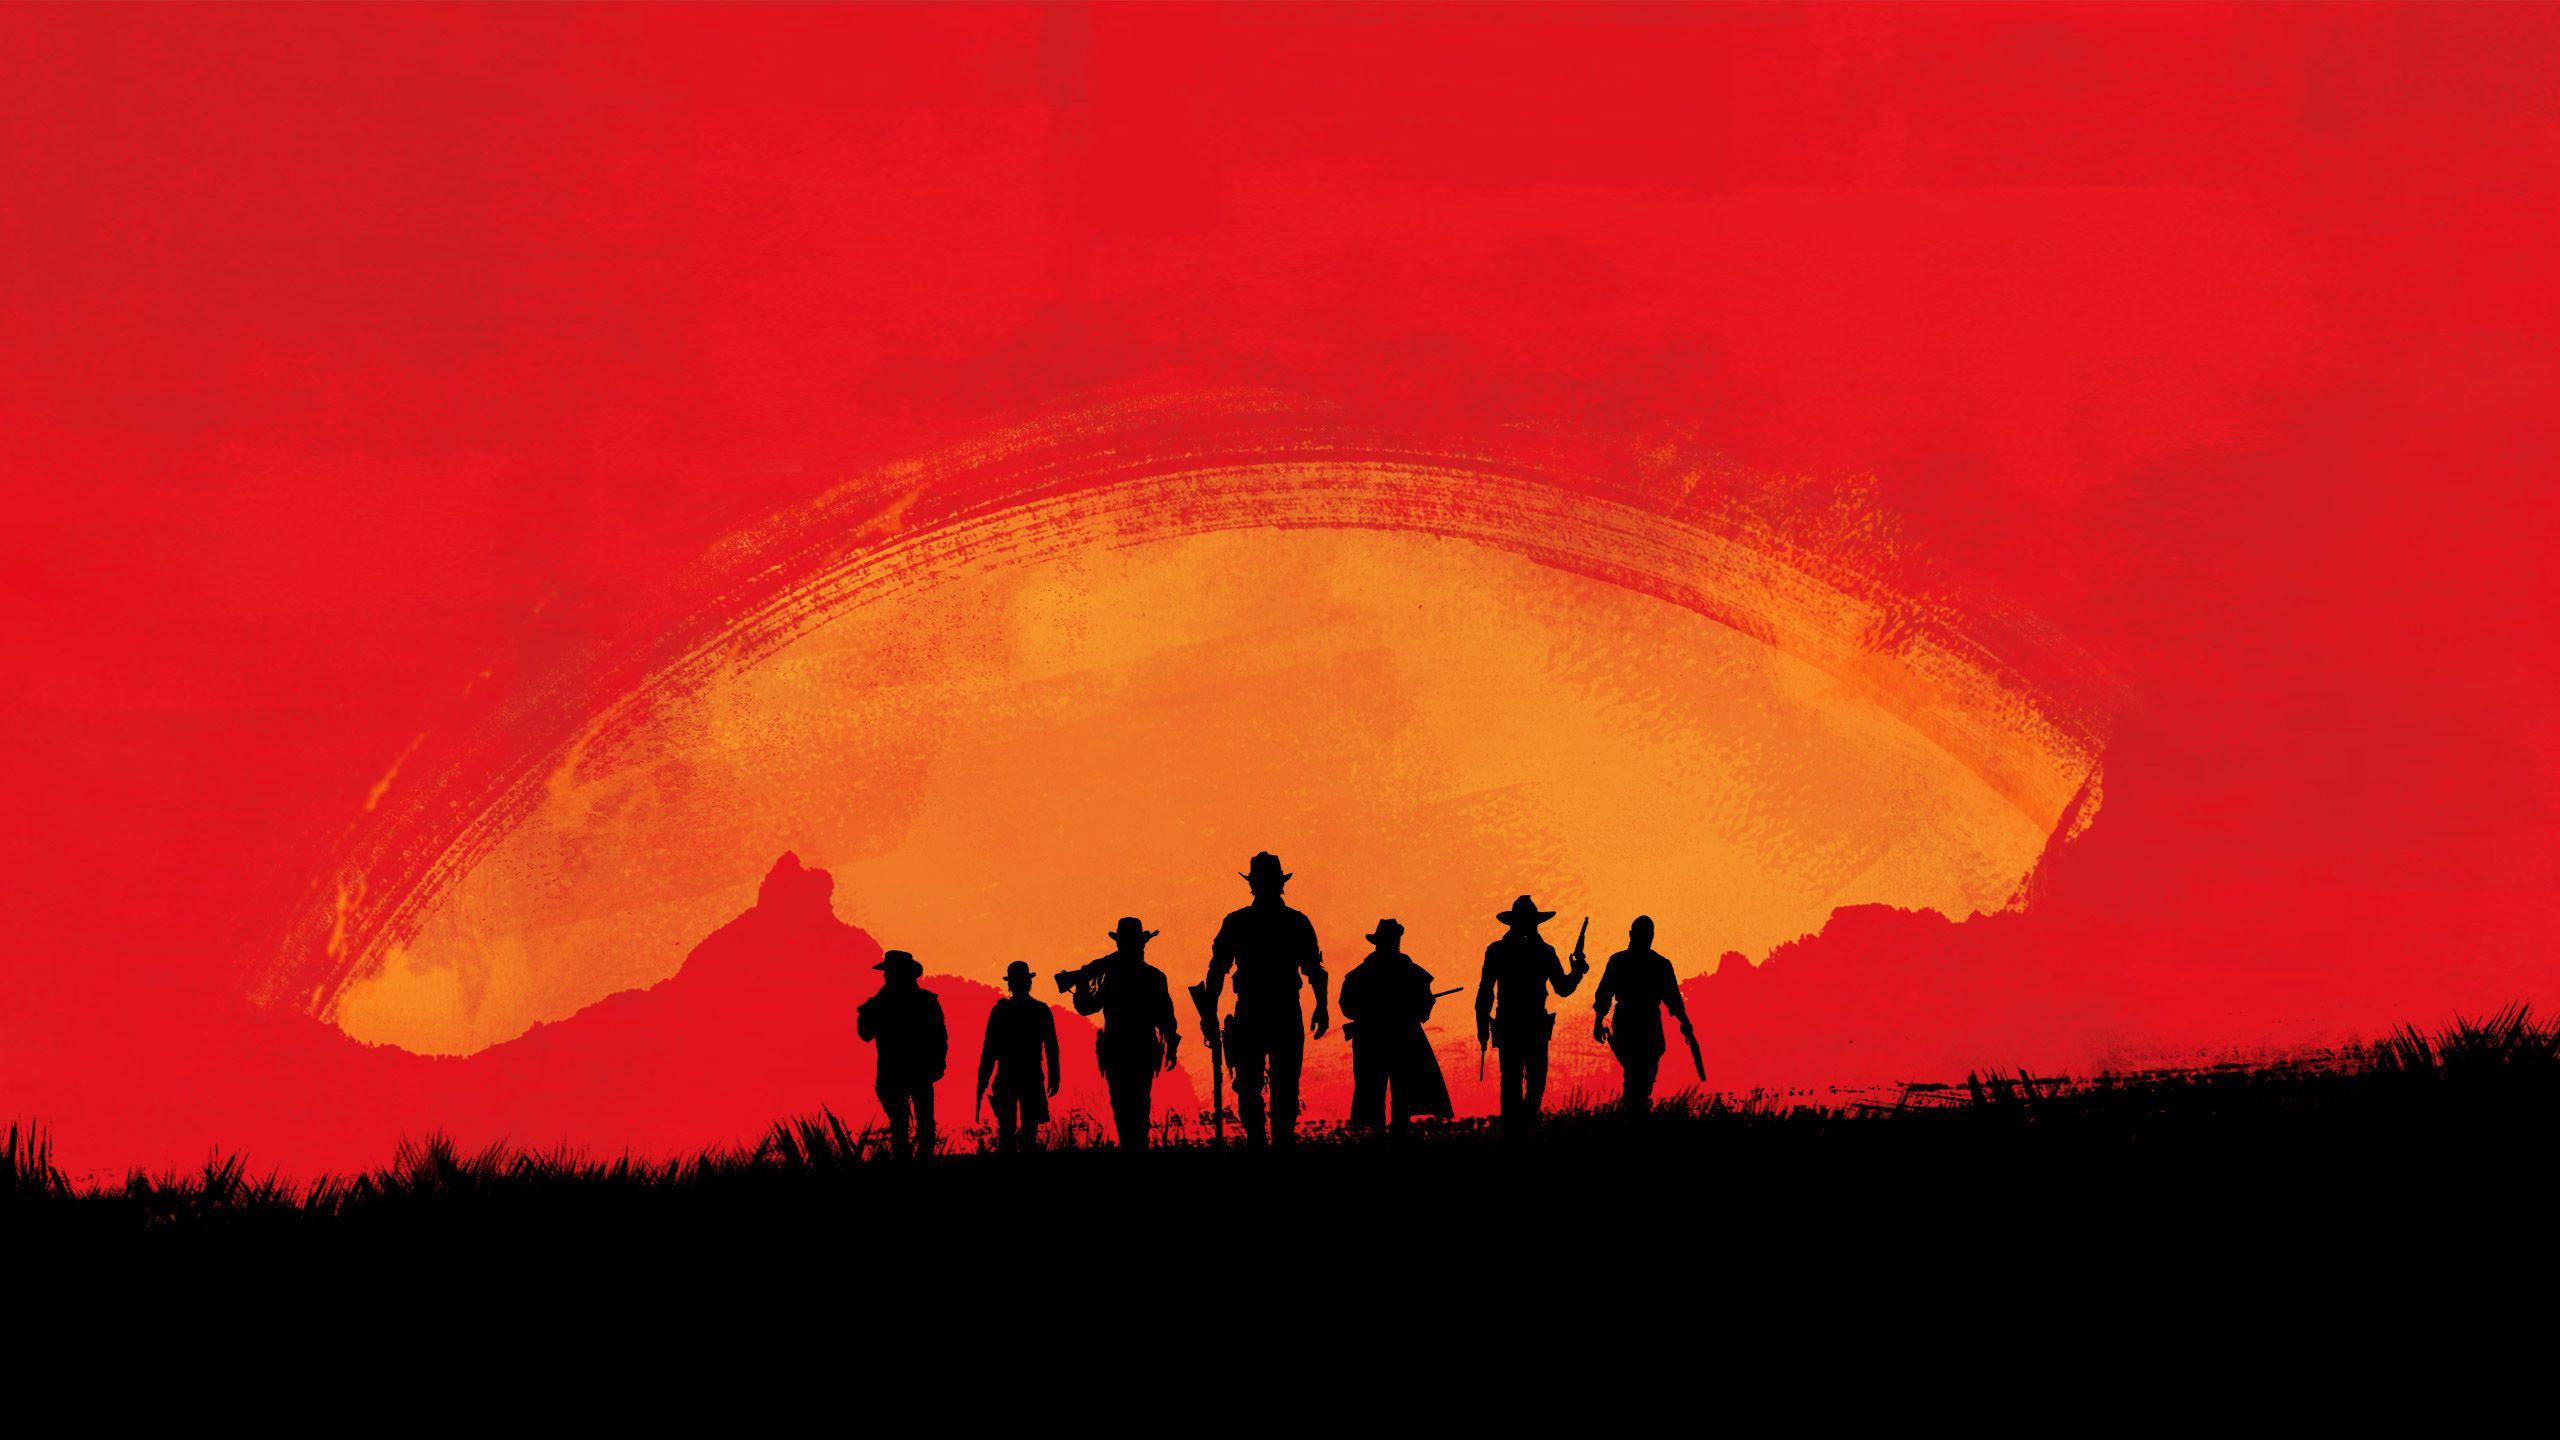 1401319 red dead redemption 2 games hd 4k 2021 games silhouette  Rare  Gallery HD Wallpapers